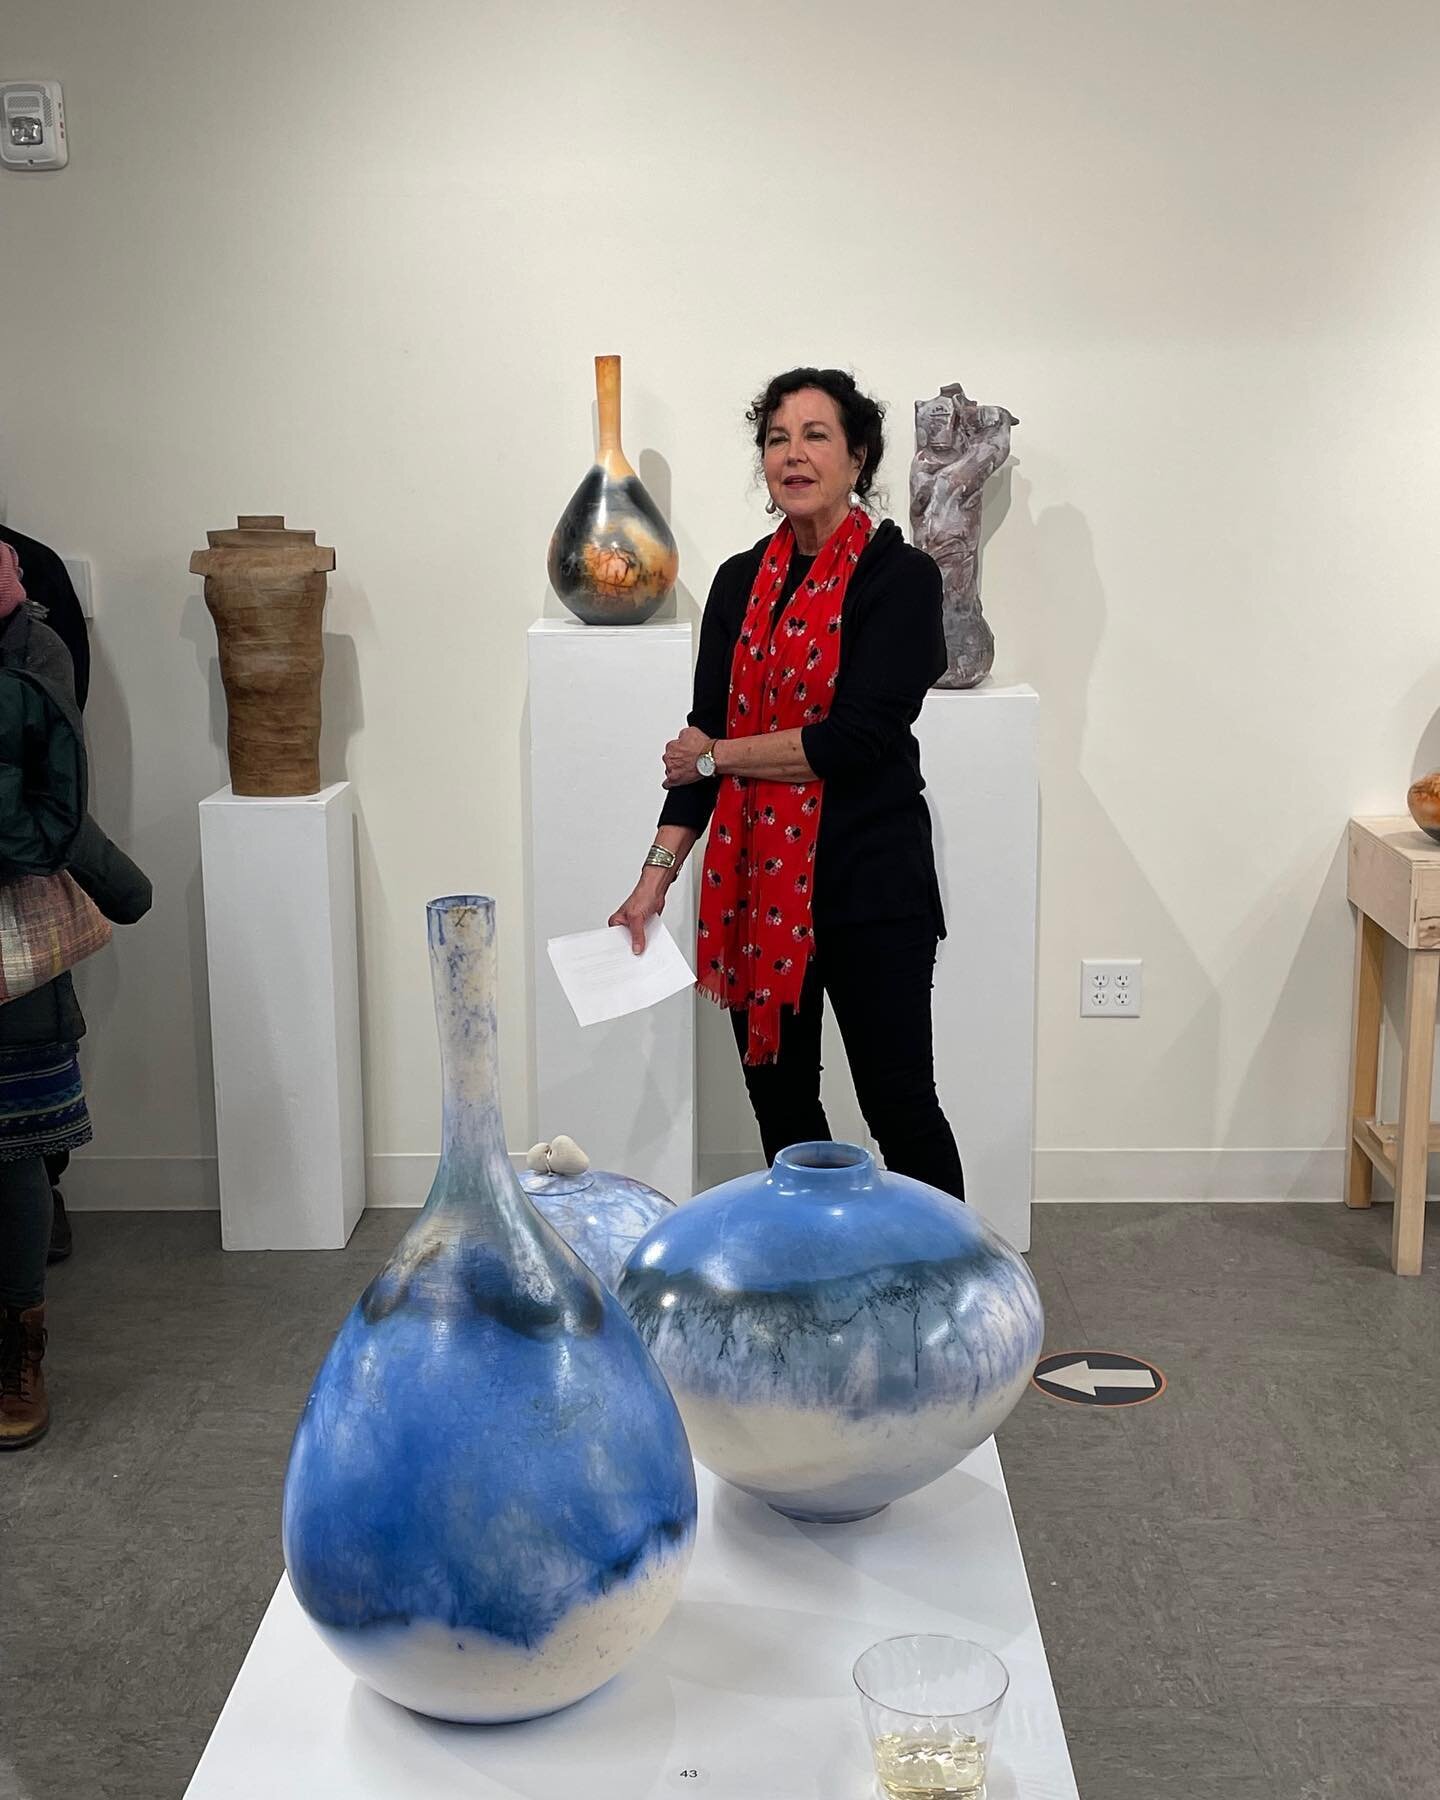 Thanks to everyone who came out and supported us at the opening of Earth Sea Sky! It was a great success! Thanks especially to my husband Ray, who took all the pictures. #umbrellaarts #saggarfired #ceramicart #concordart